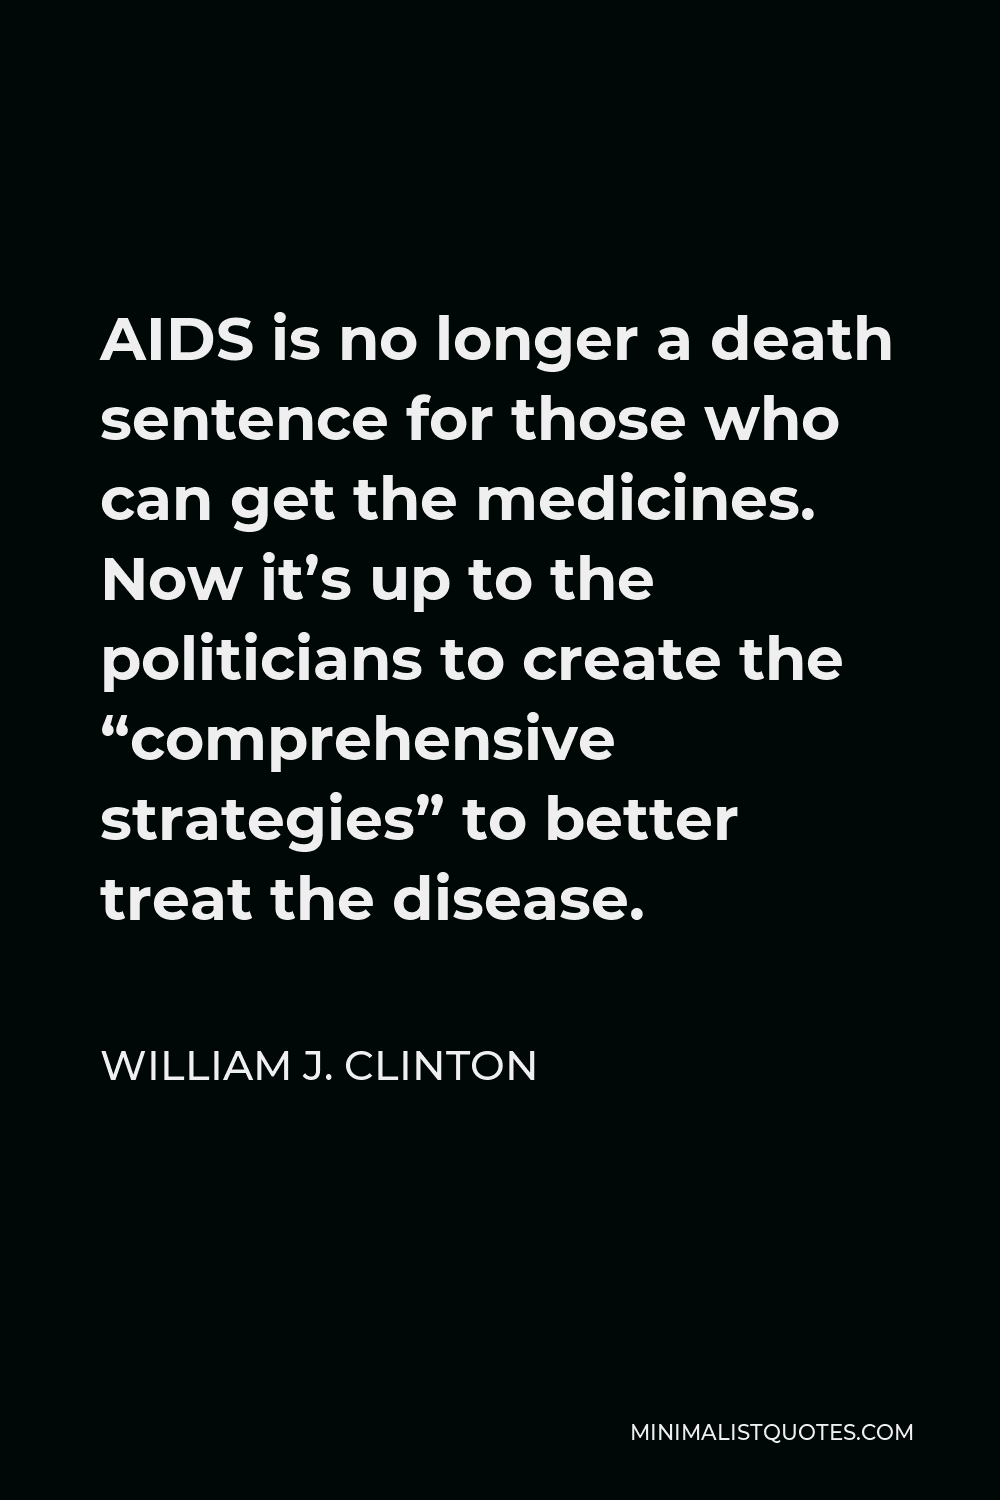 William J. Clinton Quote - AIDS is no longer a death sentence for those who can get the medicines. Now it’s up to the politicians to create the “comprehensive strategies” to better treat the disease.